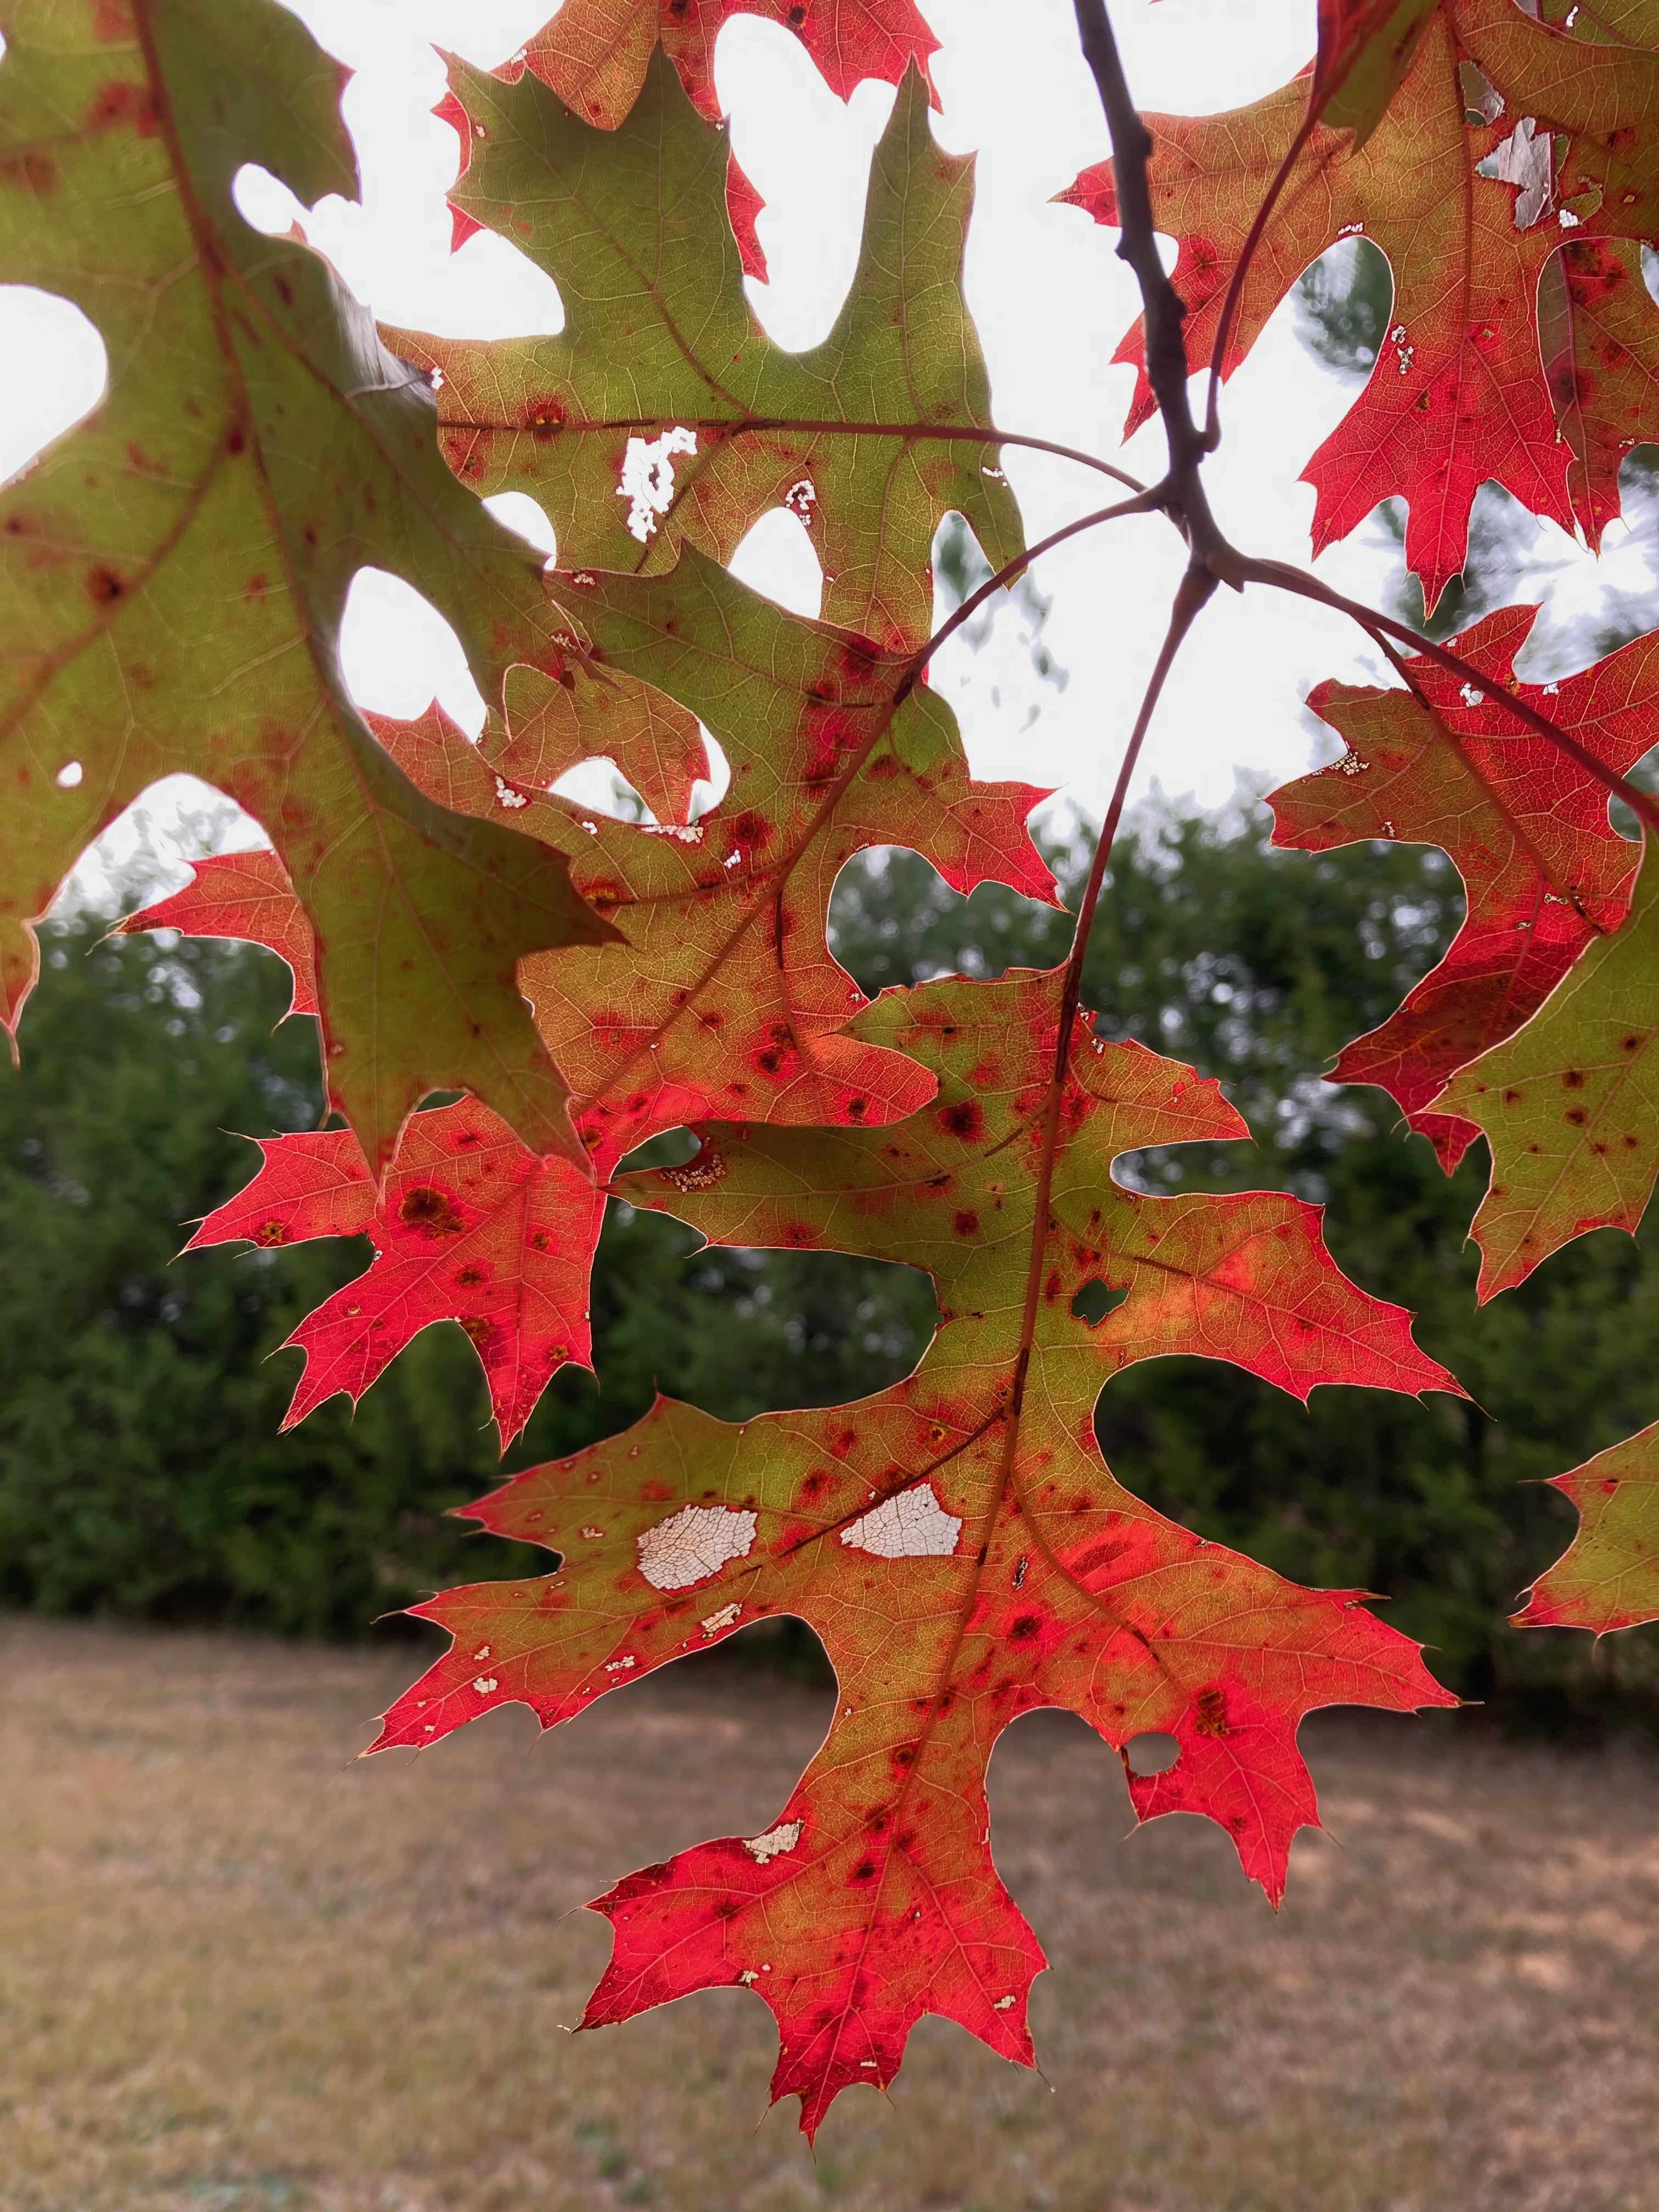 The Scientific Name is Quercus coccinea. You will likely hear them called Scarlet Oak. This picture shows the Just can't get enough of the beautiful leaves in Fall. of Quercus coccinea